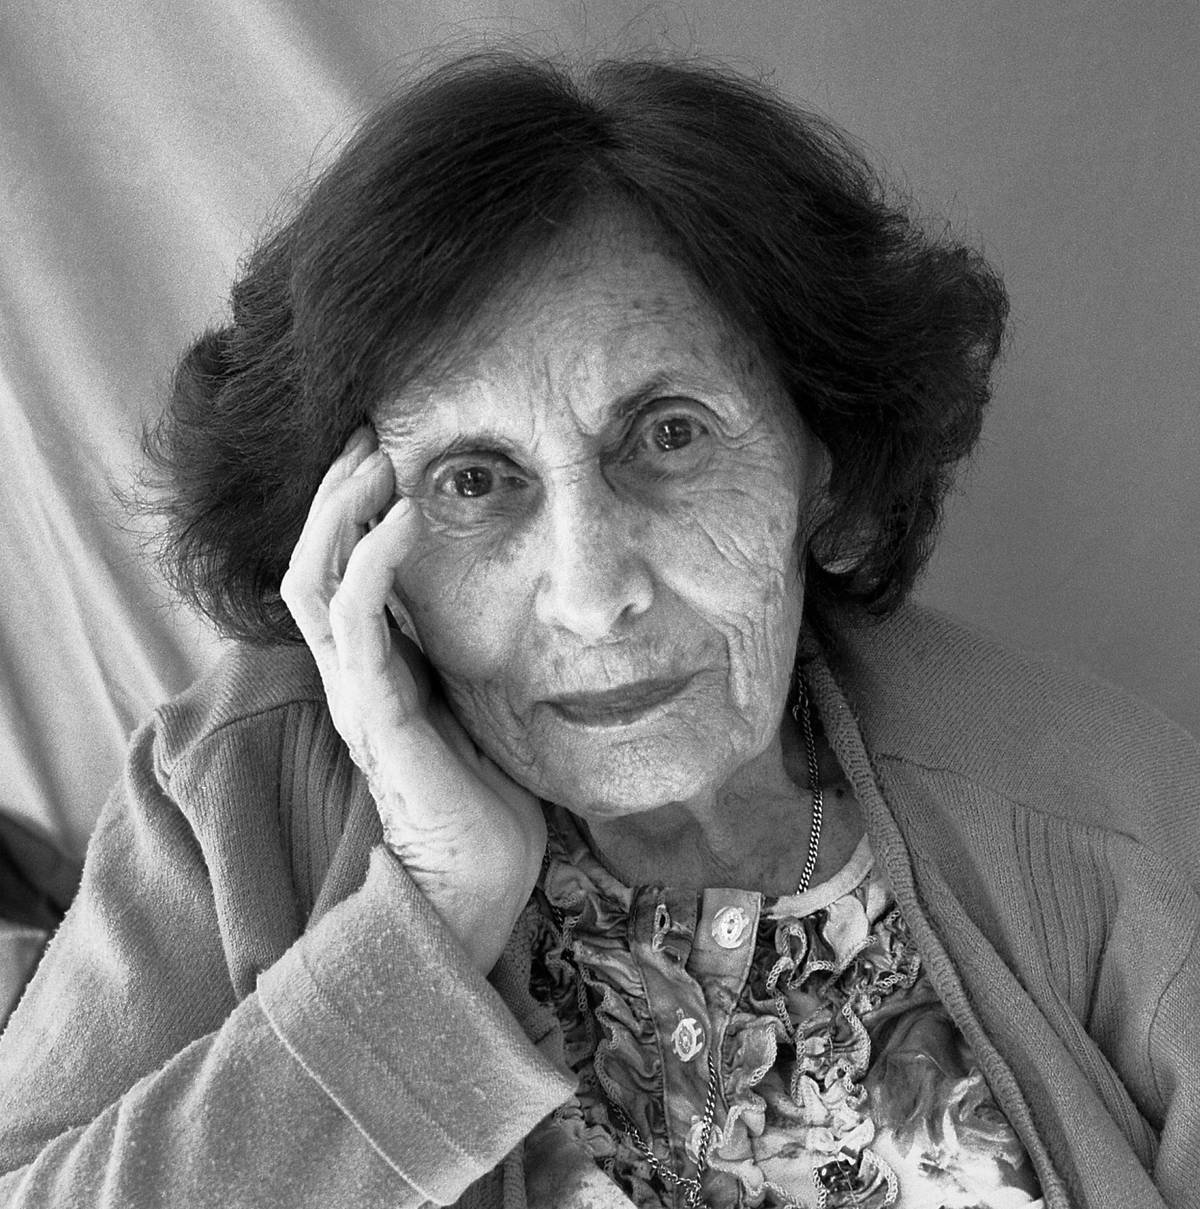 ‘Aunt Avigail’ (Avigail Sheffer), matriarch of the family, and specialist in ancient ceramics and textiles from Masada.